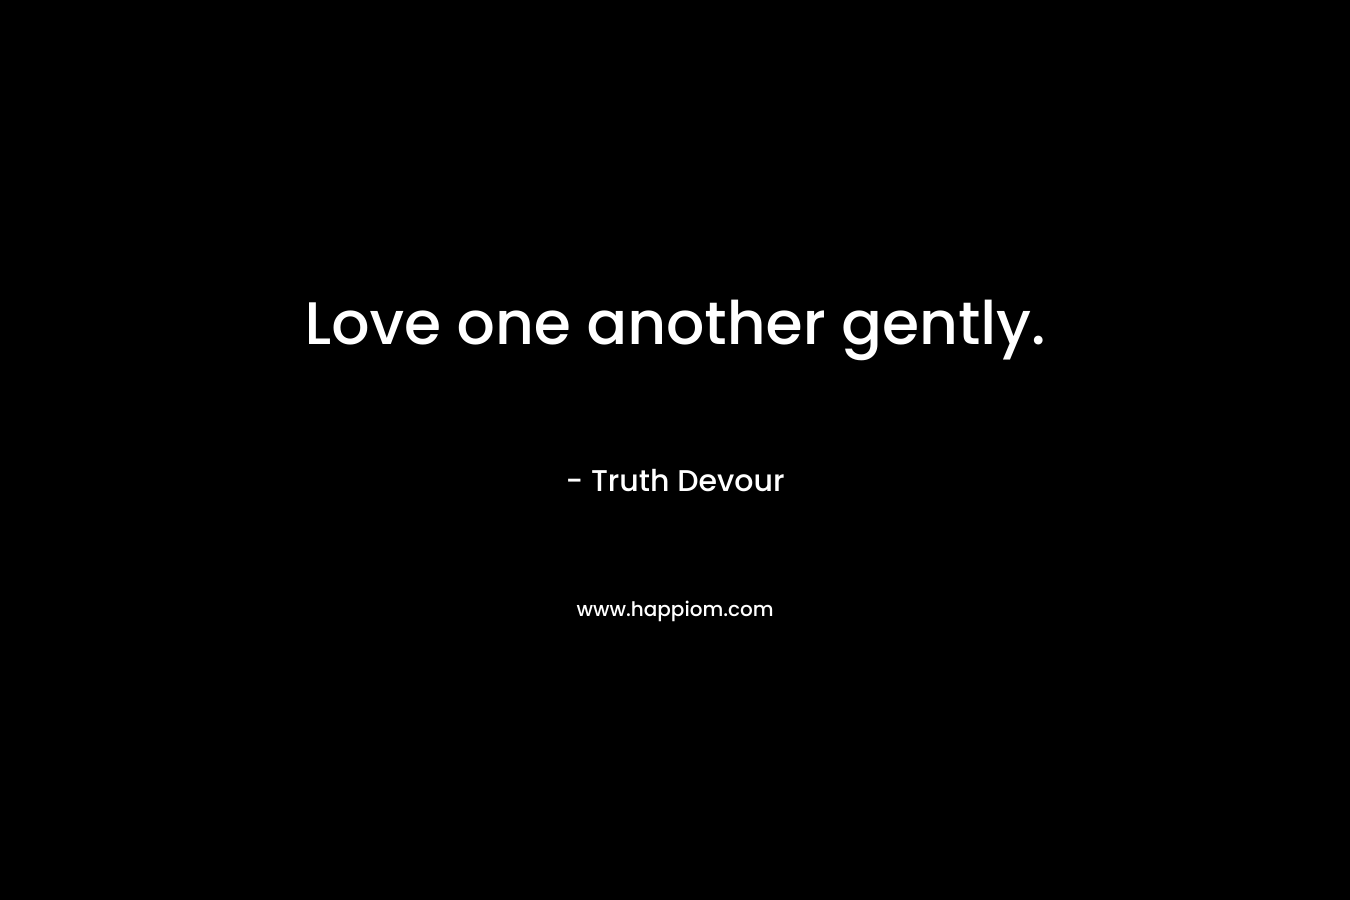 Love one another gently.